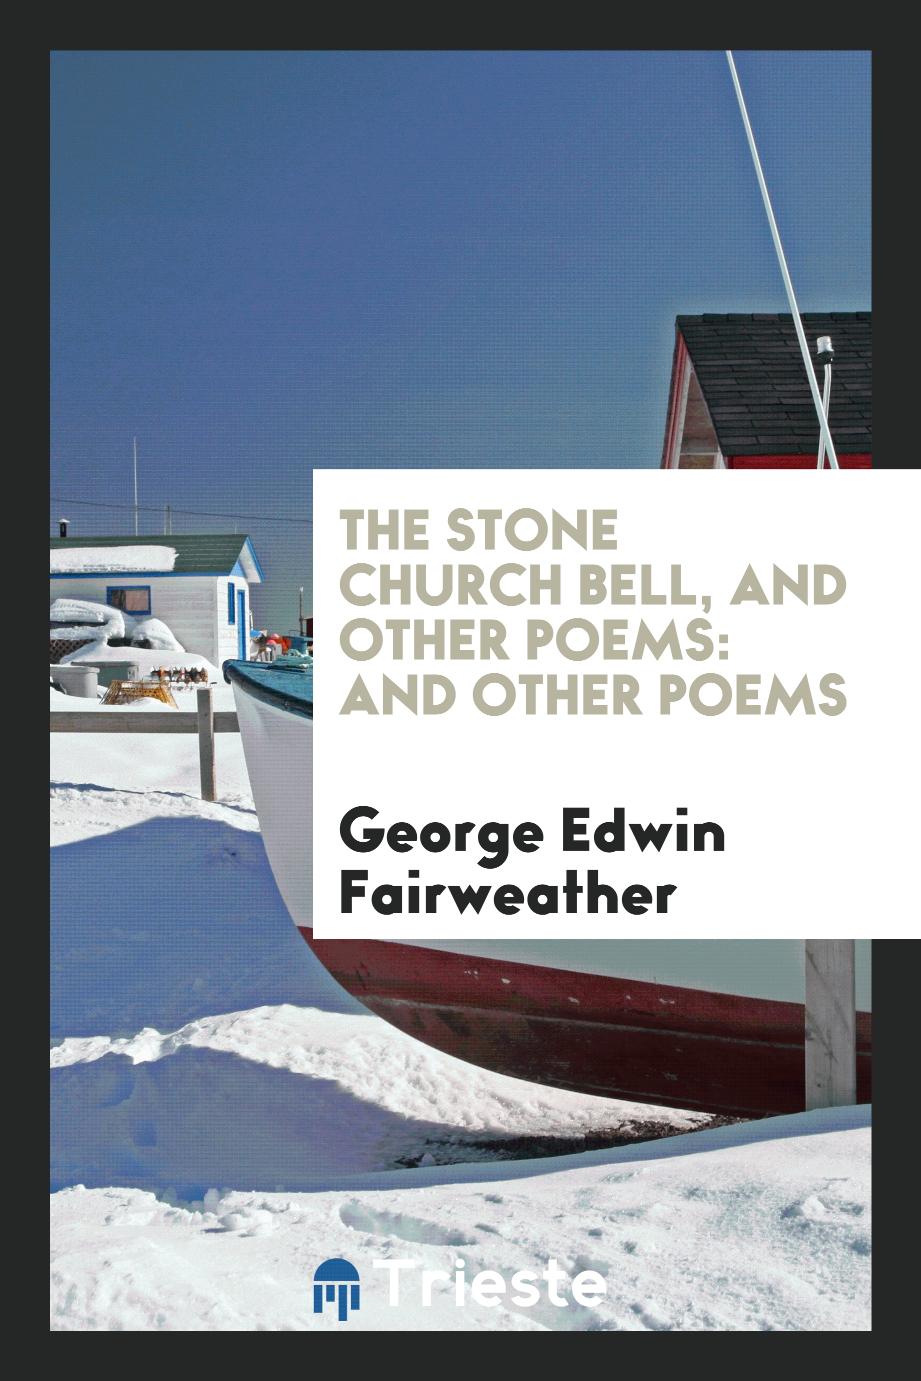 The Stone Church Bell, and Other Poems: And Other Poems